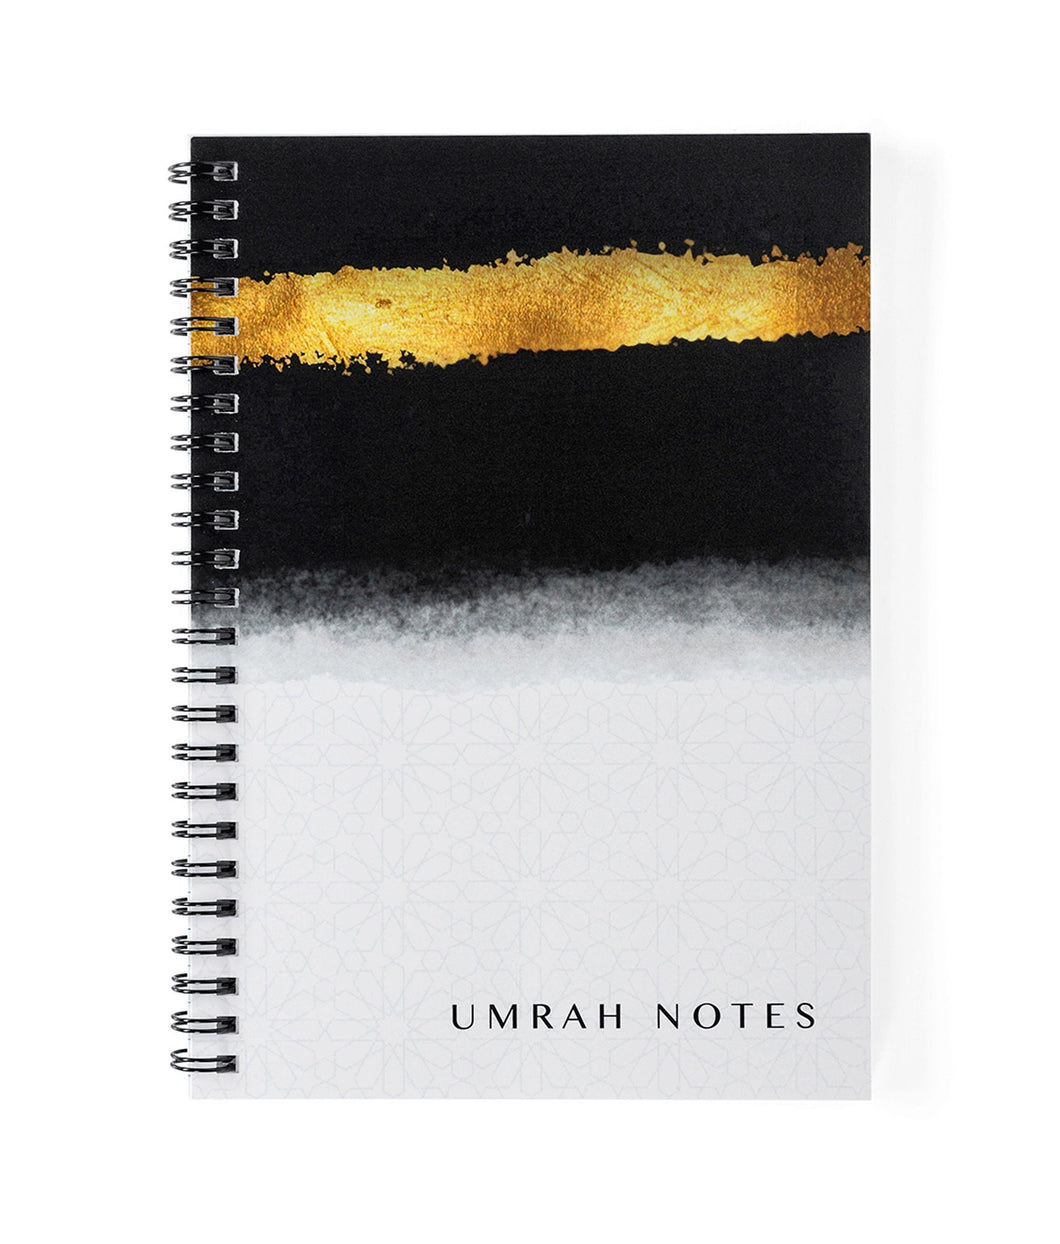 Umrah Notes - Wiro Notebook - Salam Occasions - Islamic Moments